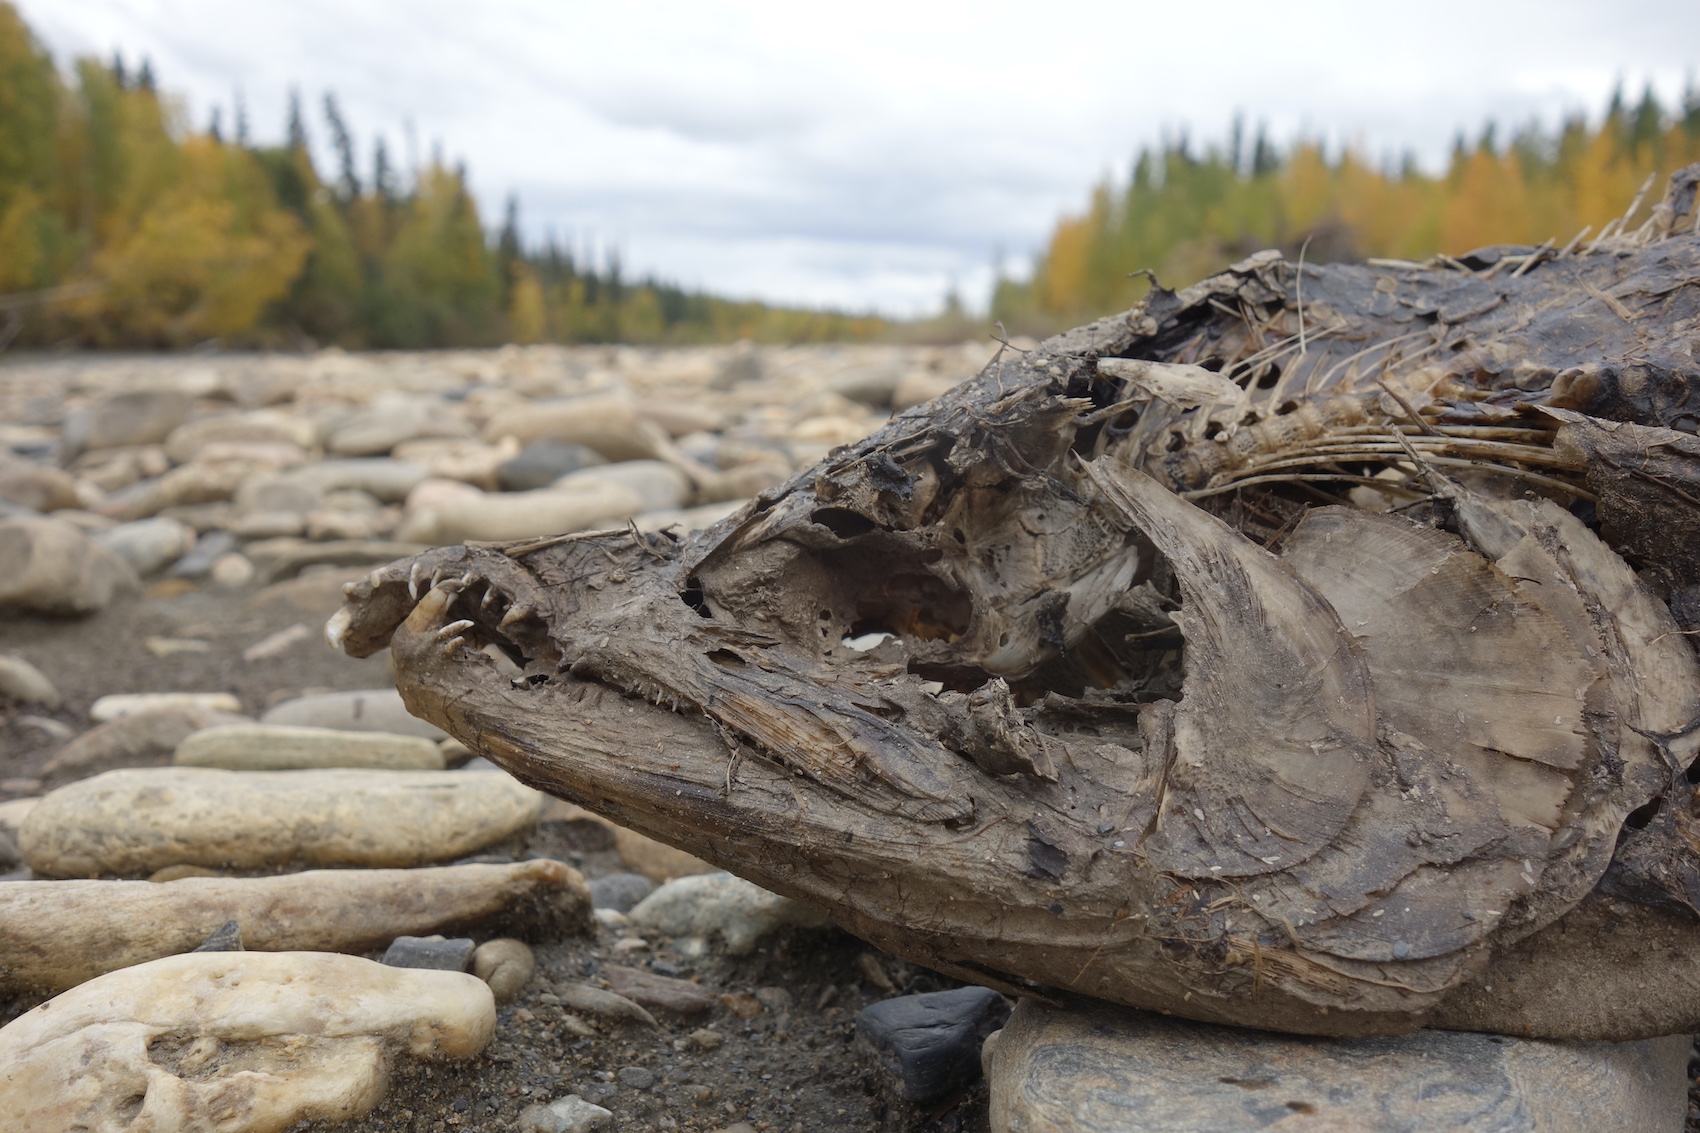 A dead, decaying salmon lies on a river's gravel bar.